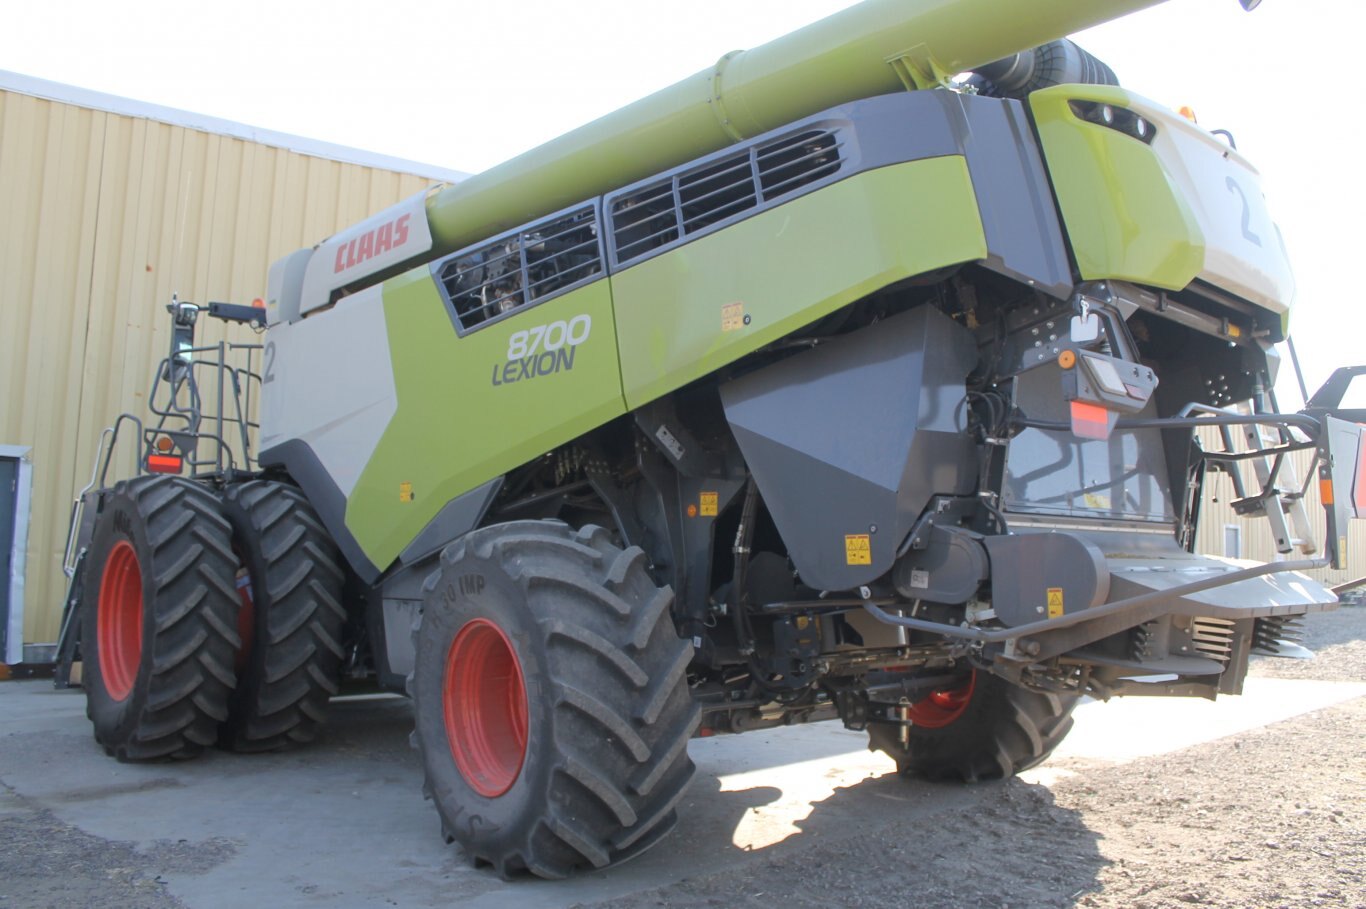 2022 CLAAS LEXION 8700, 101 Hrs, 2023 Year Updates, Loaded